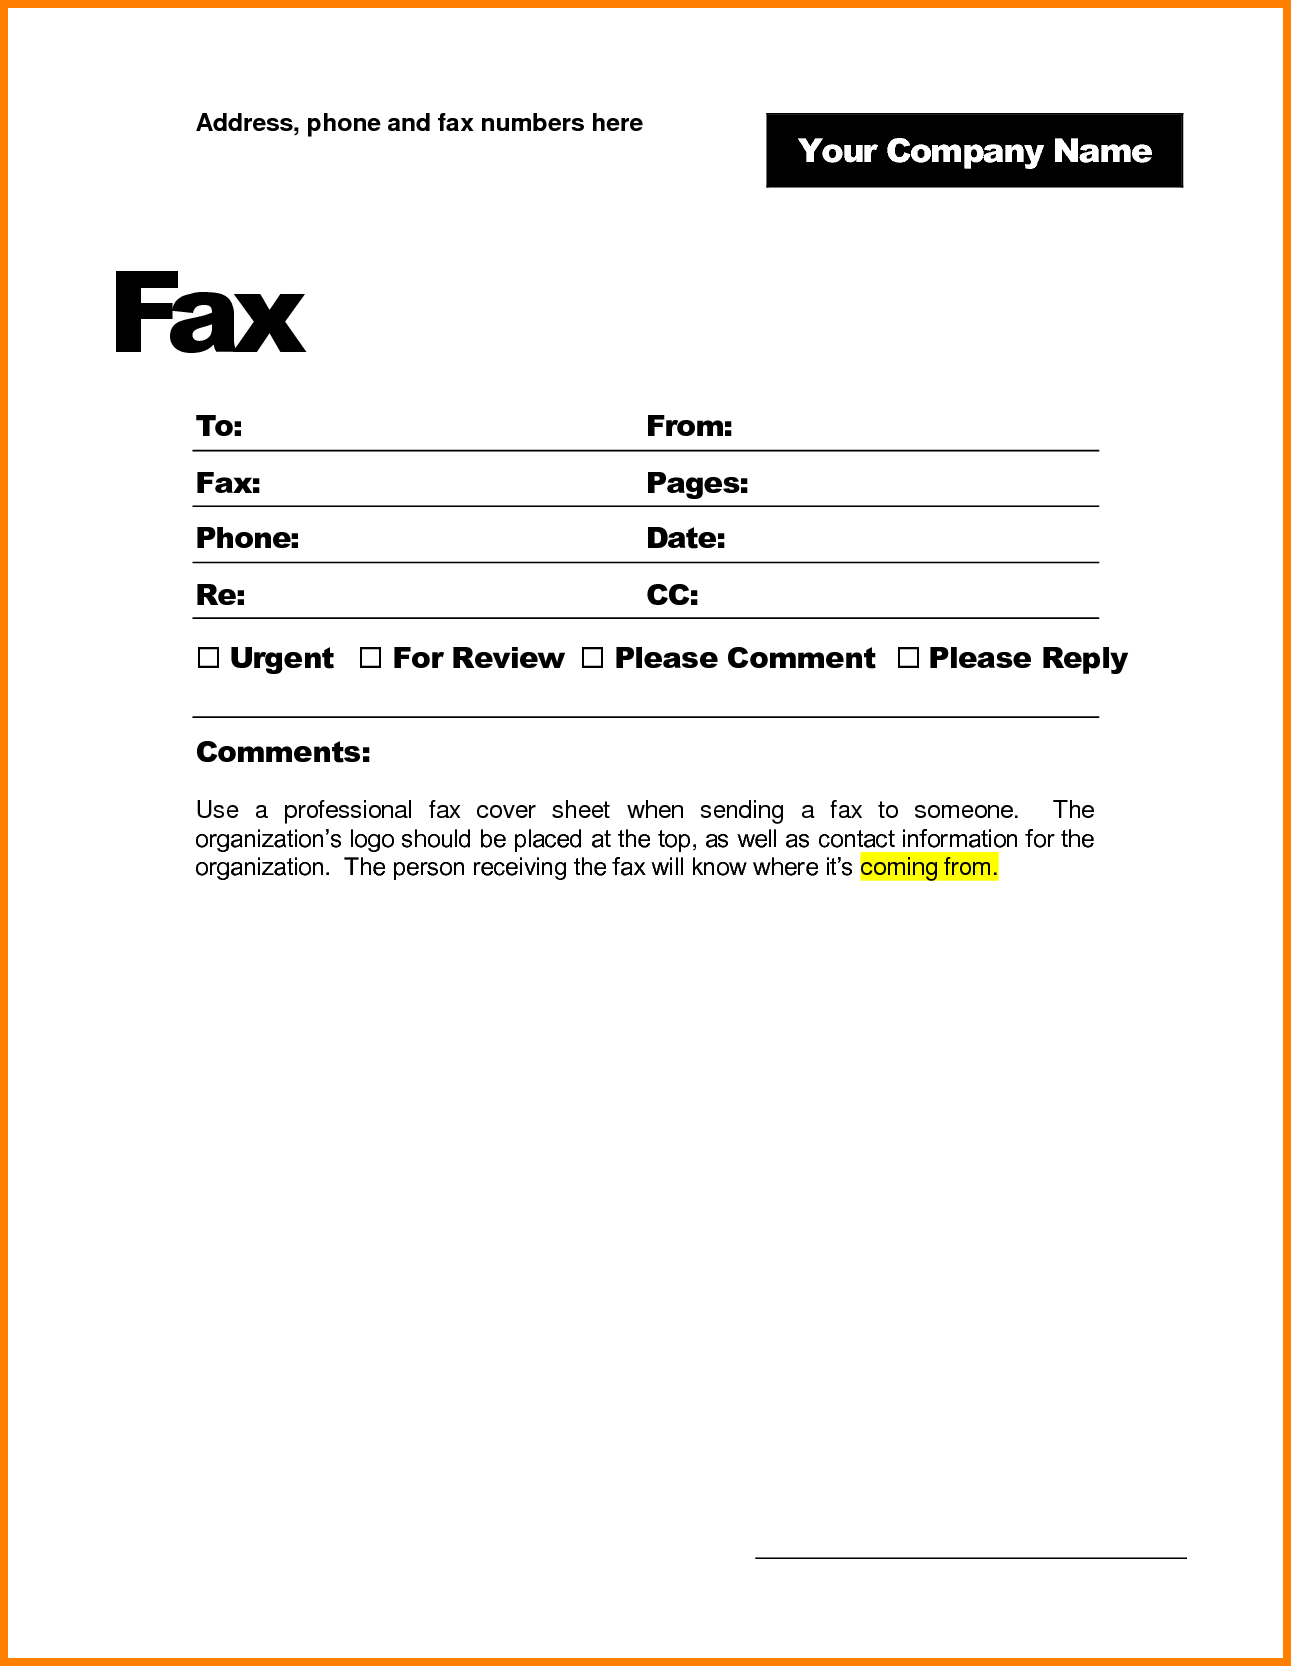 fax-cover-sheet-template-1-1